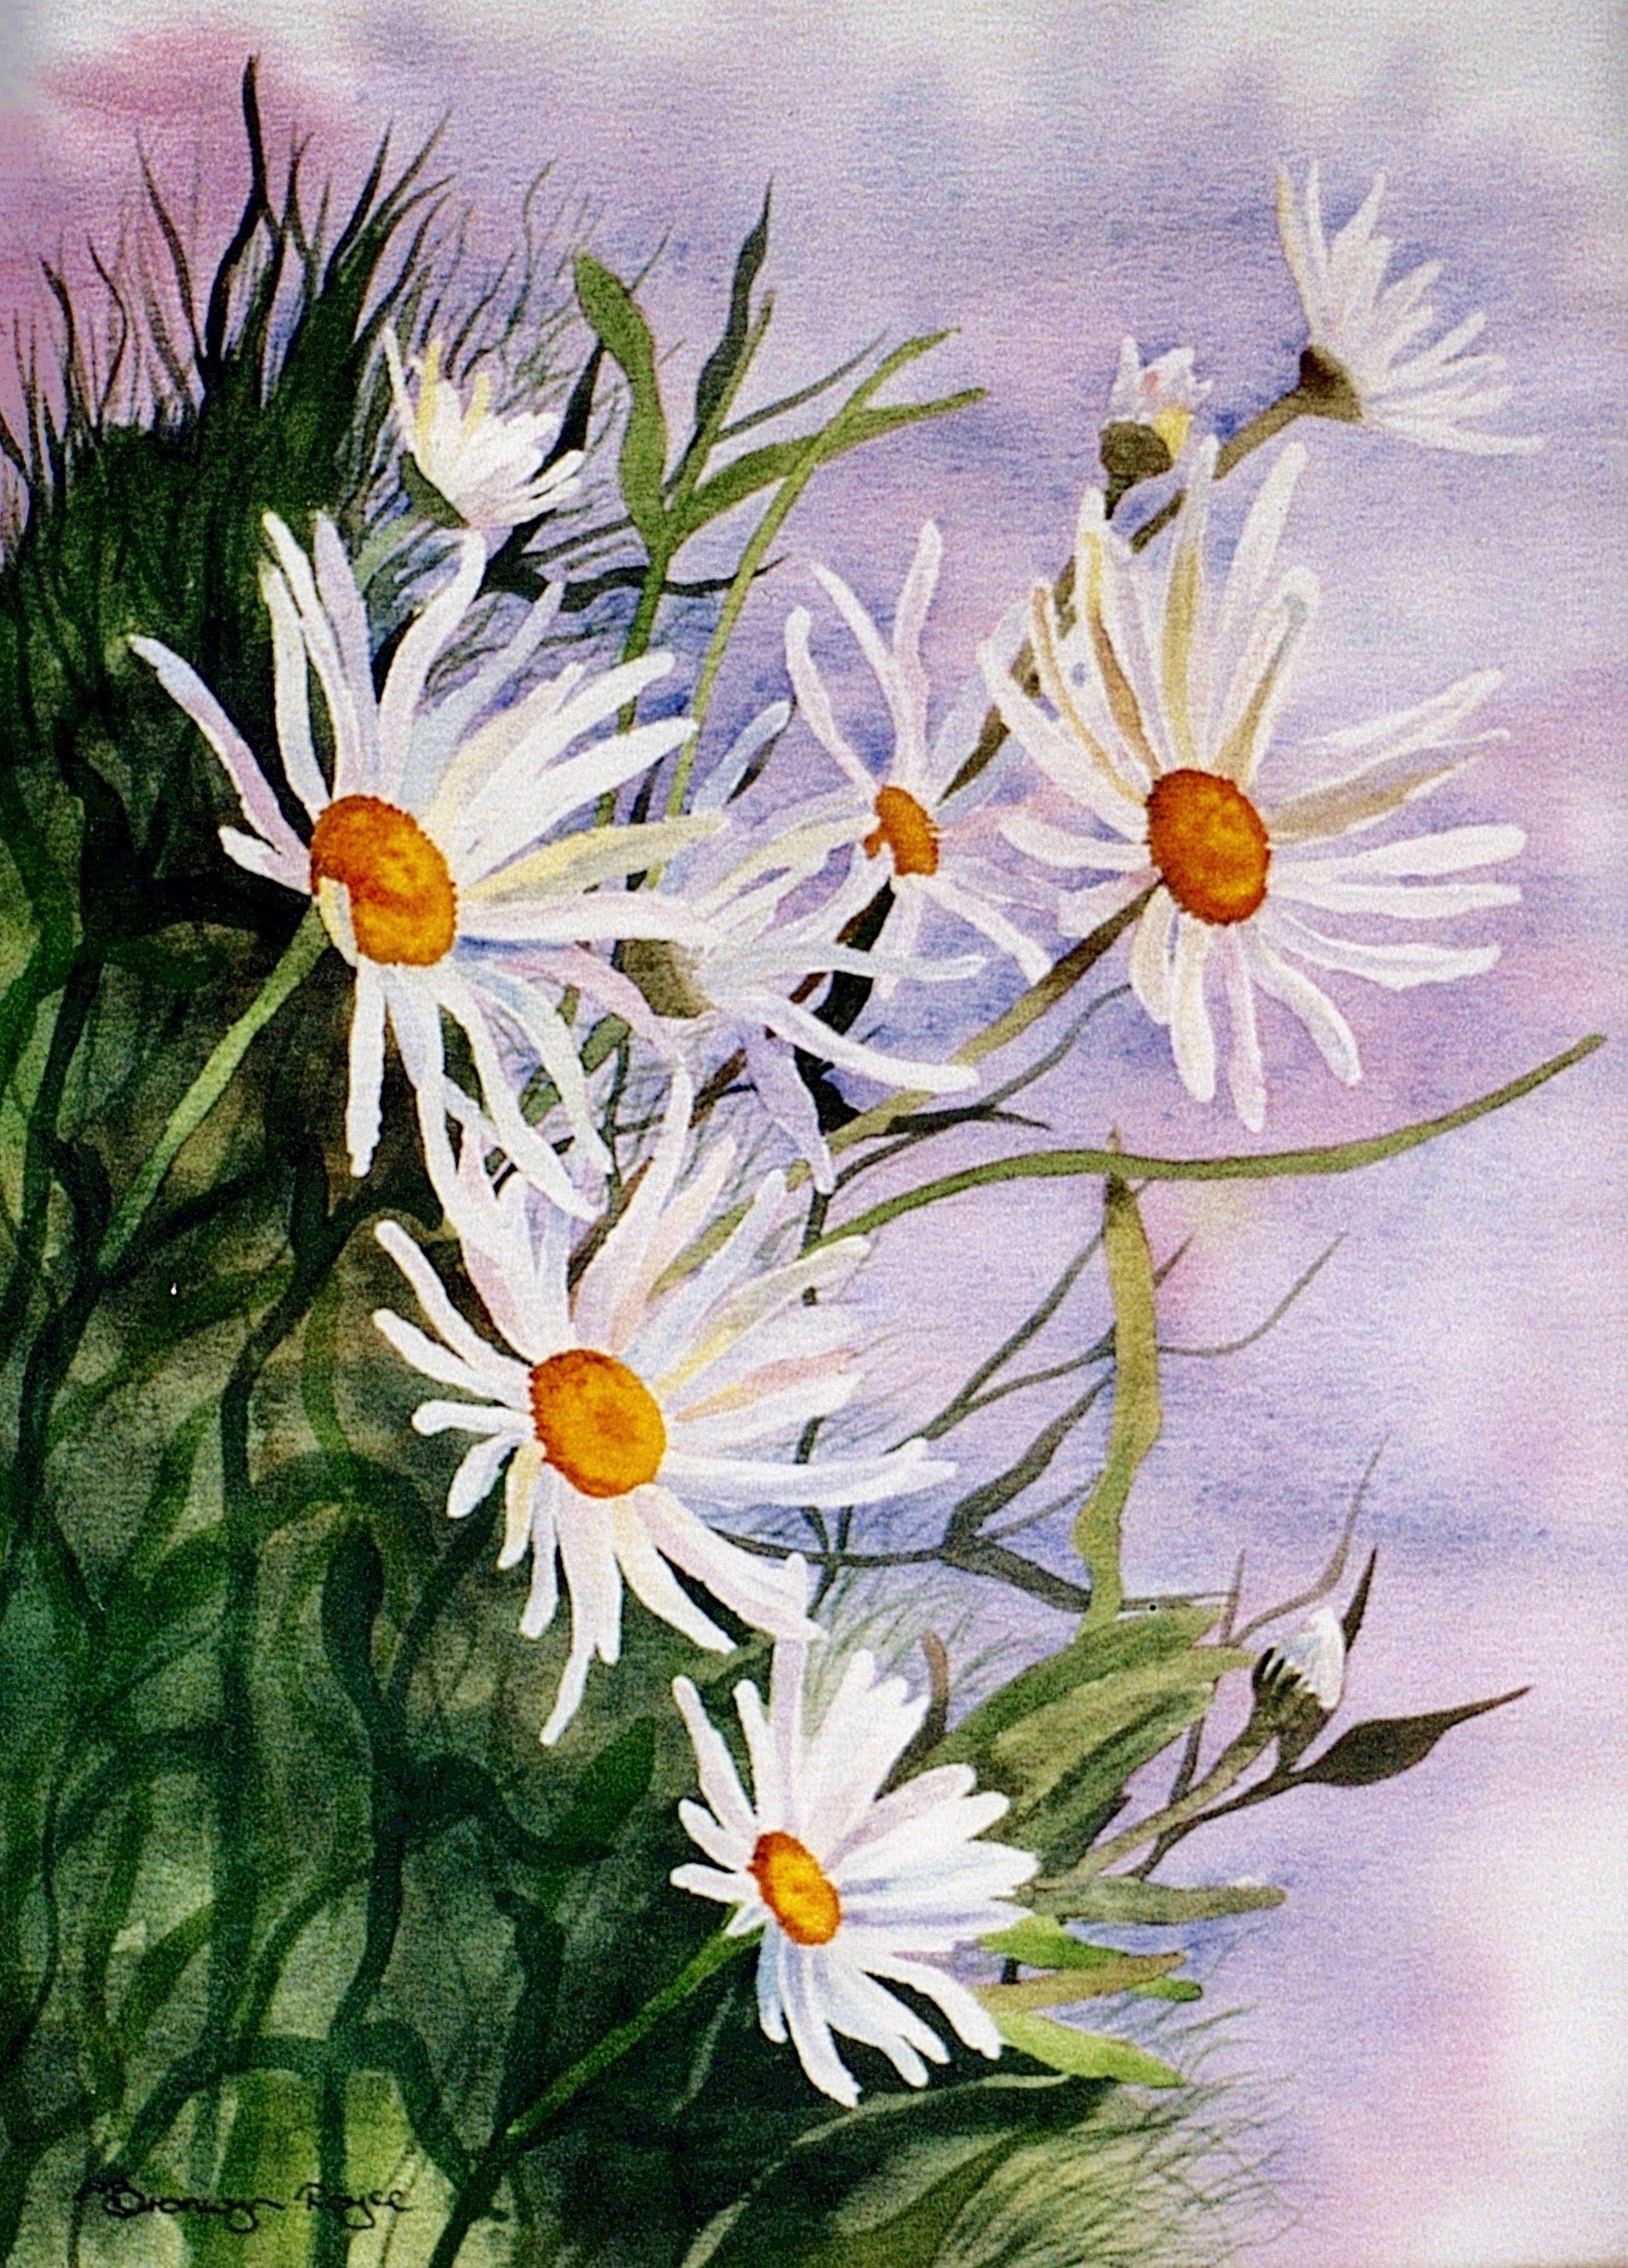 Daisies wild and free